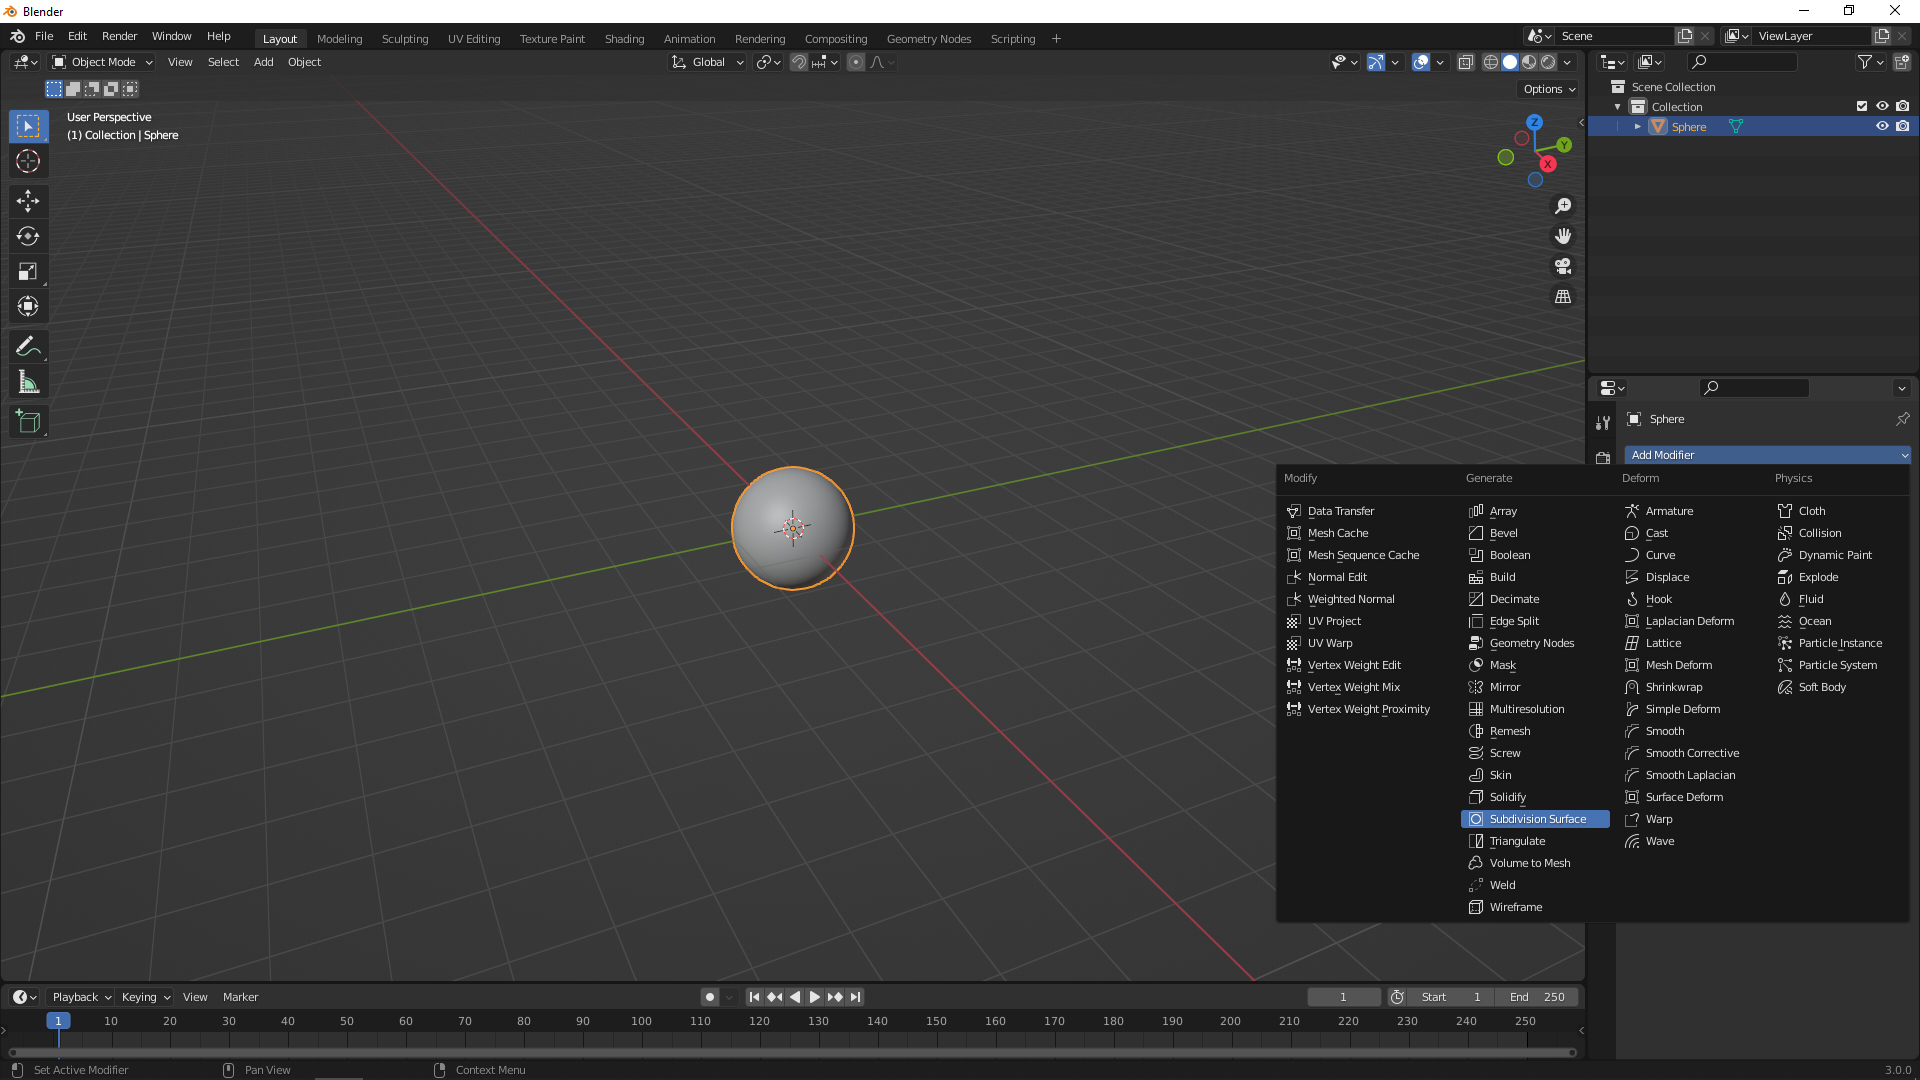 interieur etiquette Specificiteit How to make a smooth sphere in Blender - cgian.com